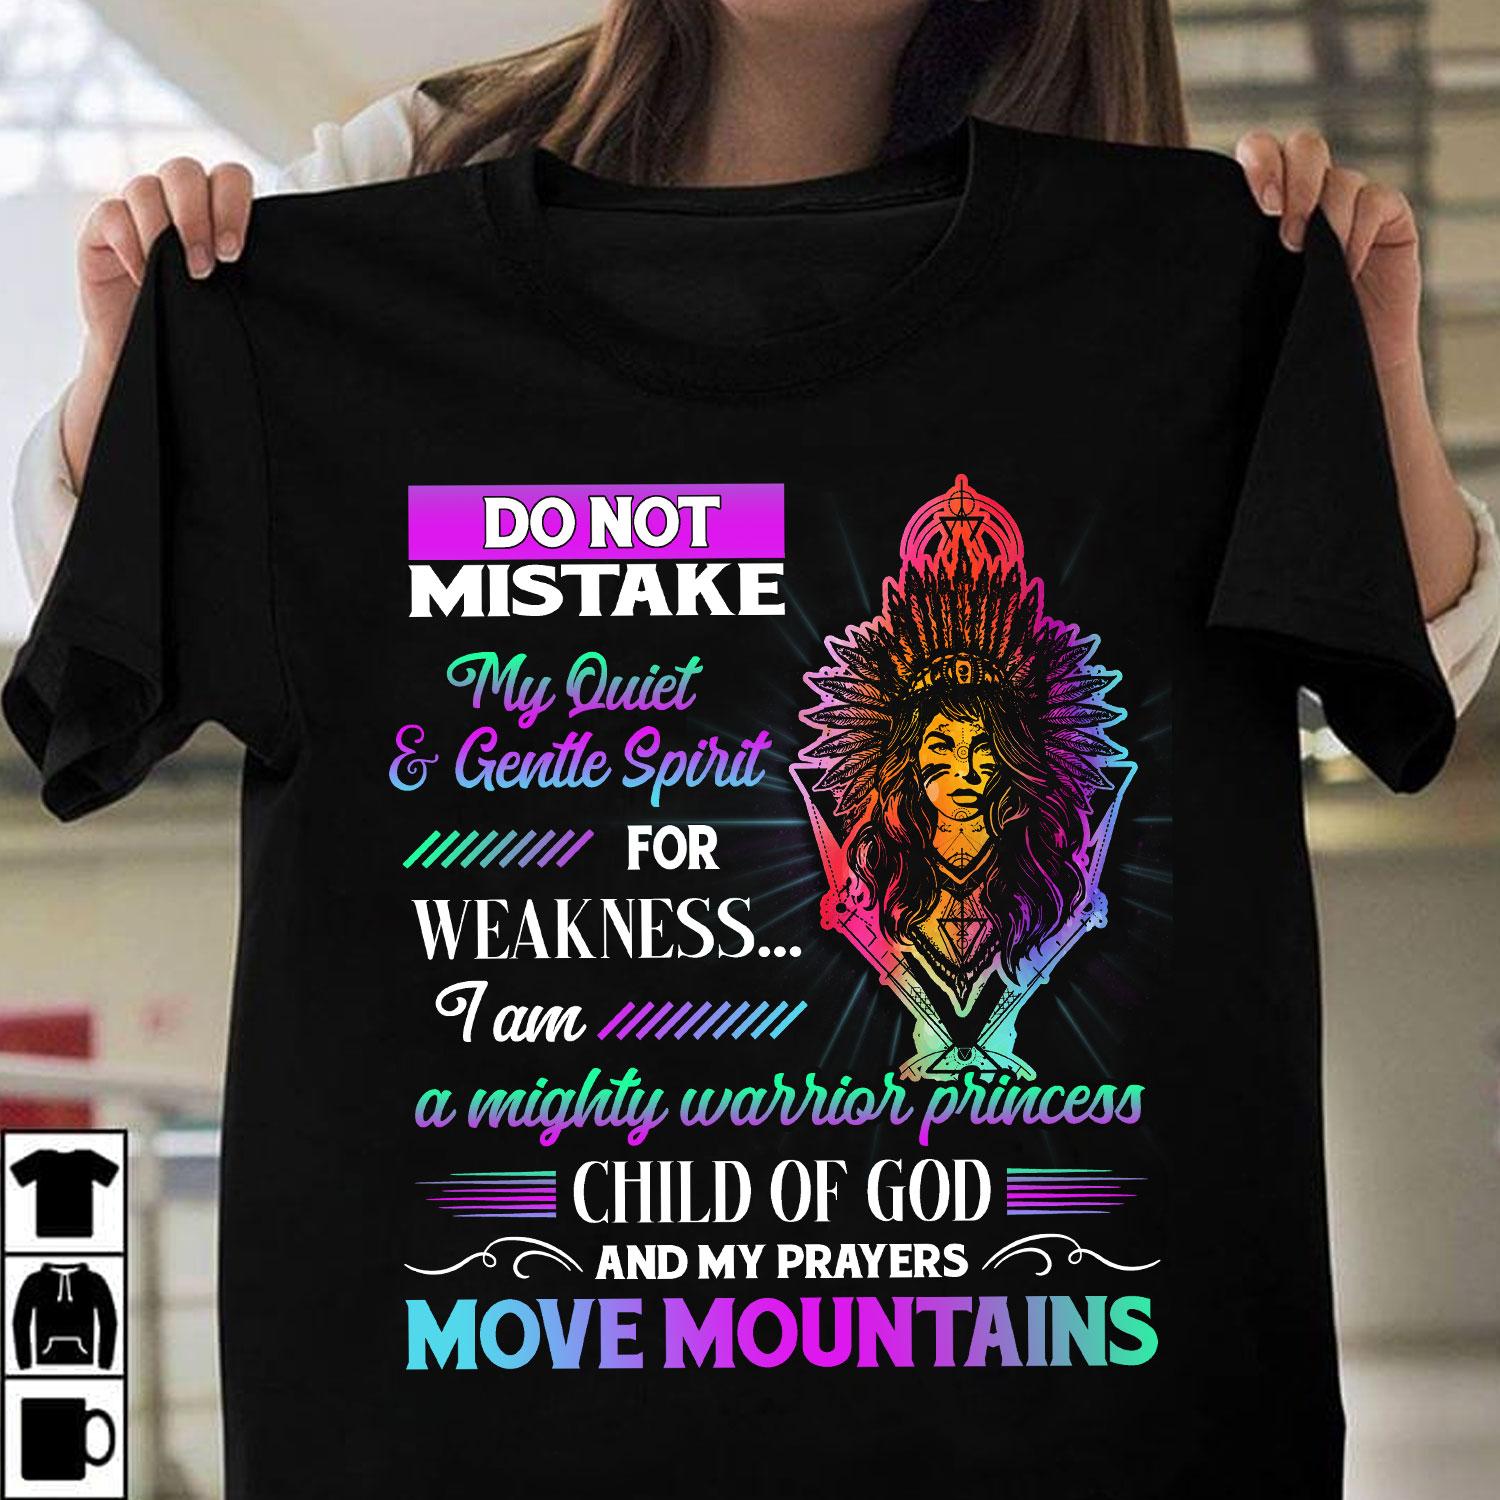 Do not mistake my quiet and gentle spirit for weakness - Mighty warrior princess, Child of God